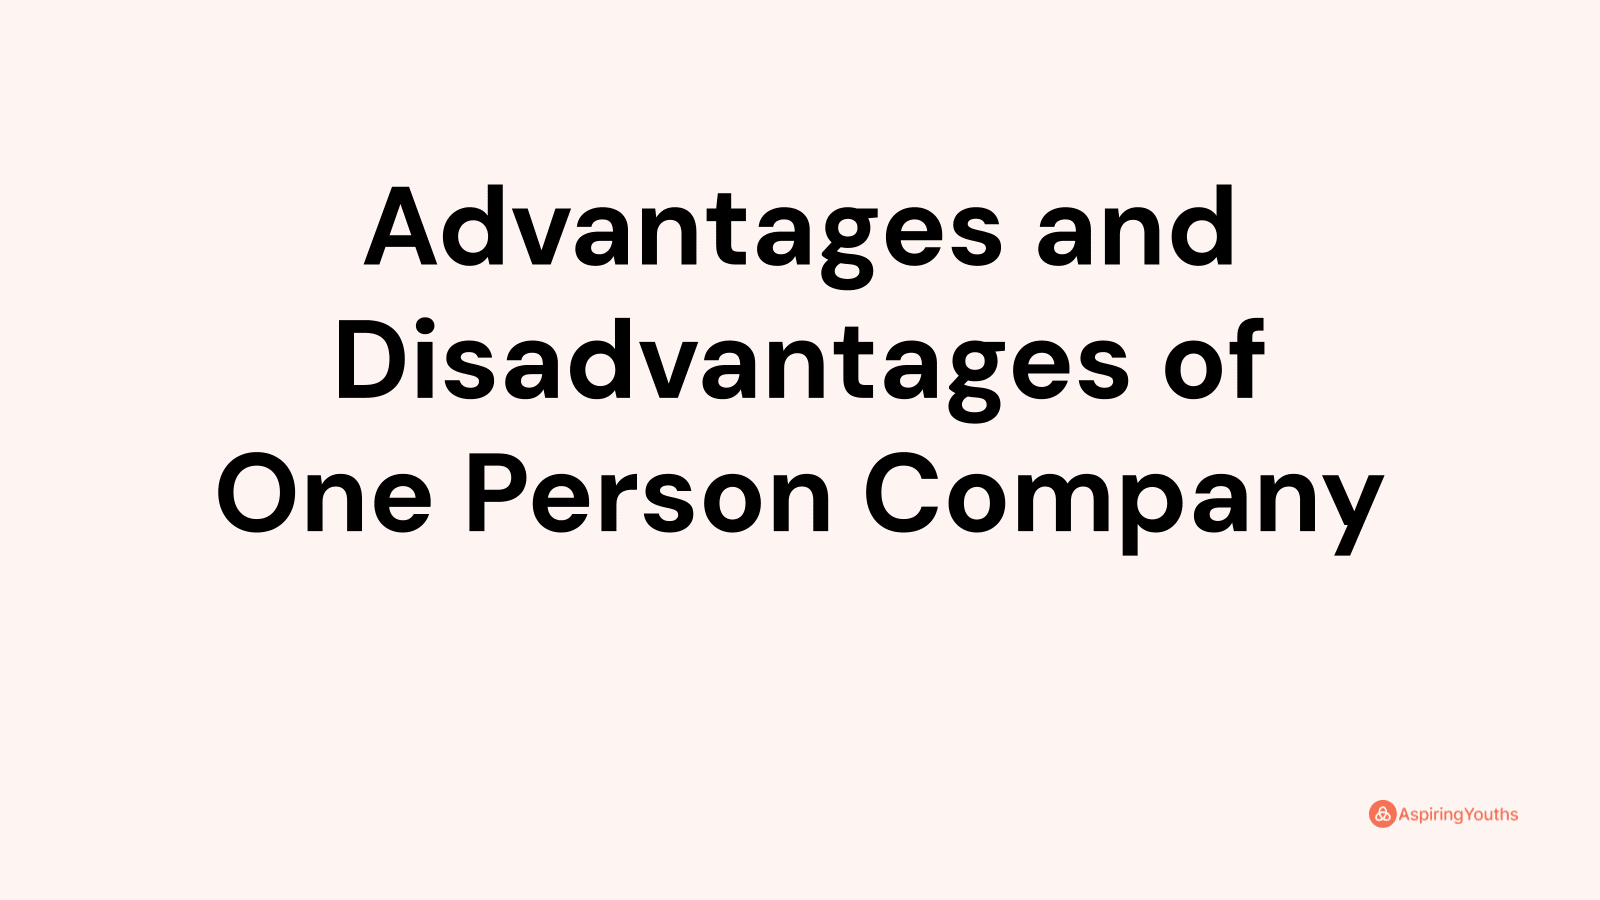 Advantages and disadvantages of One Person Company